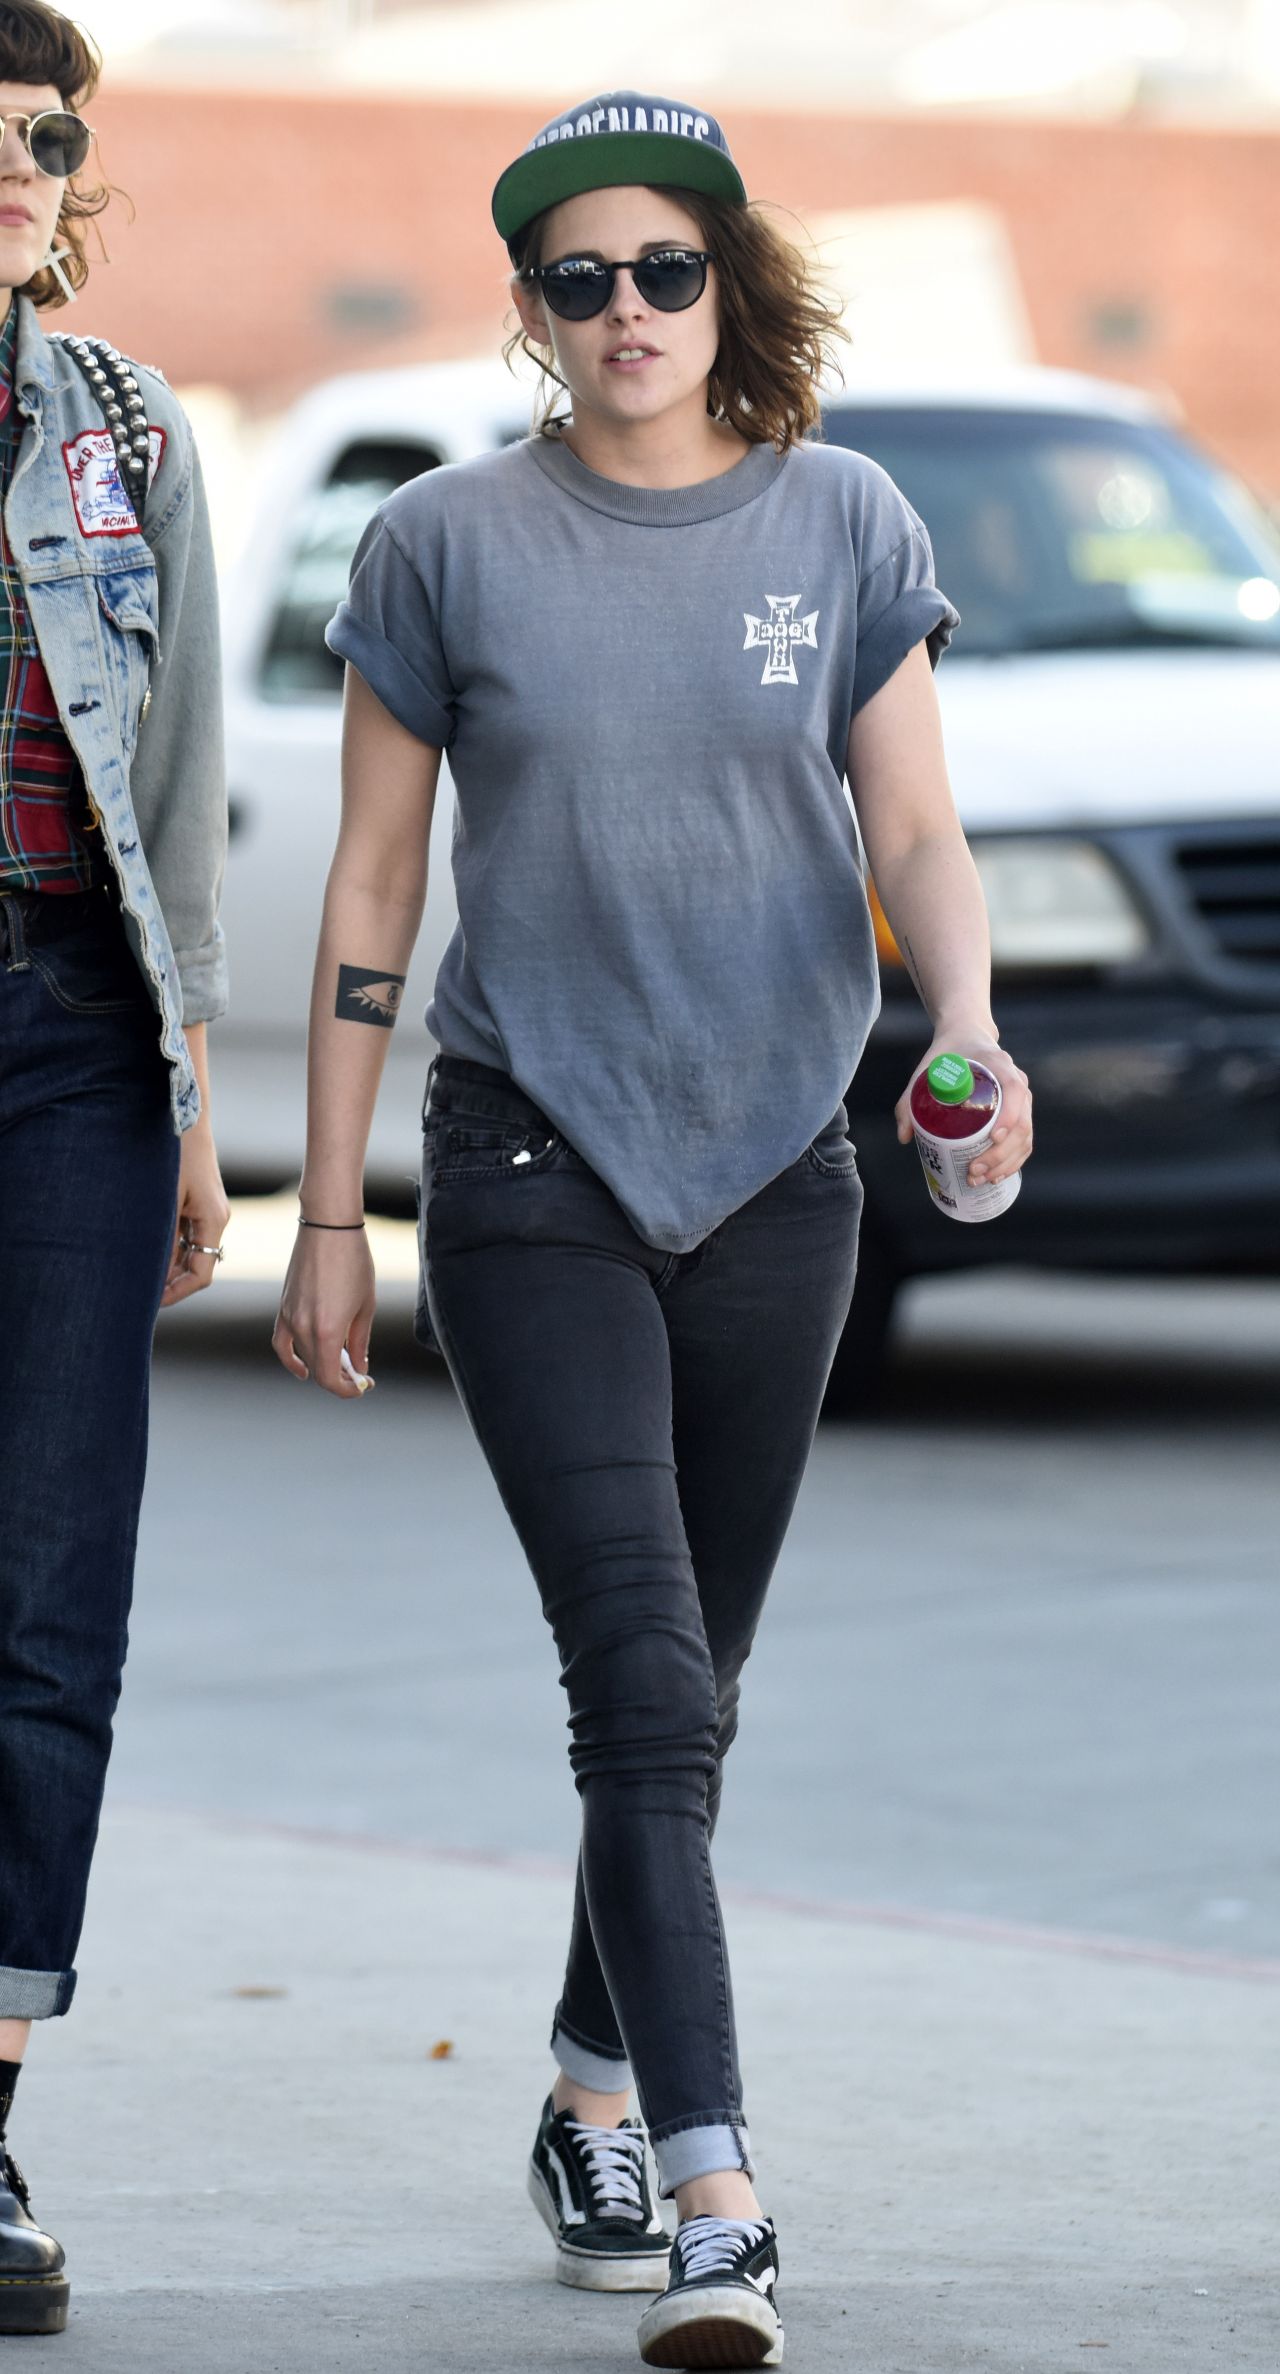 kristen-stewart-street-style-out-and-about-in-los-angeles-3-3-2016-1.jpg